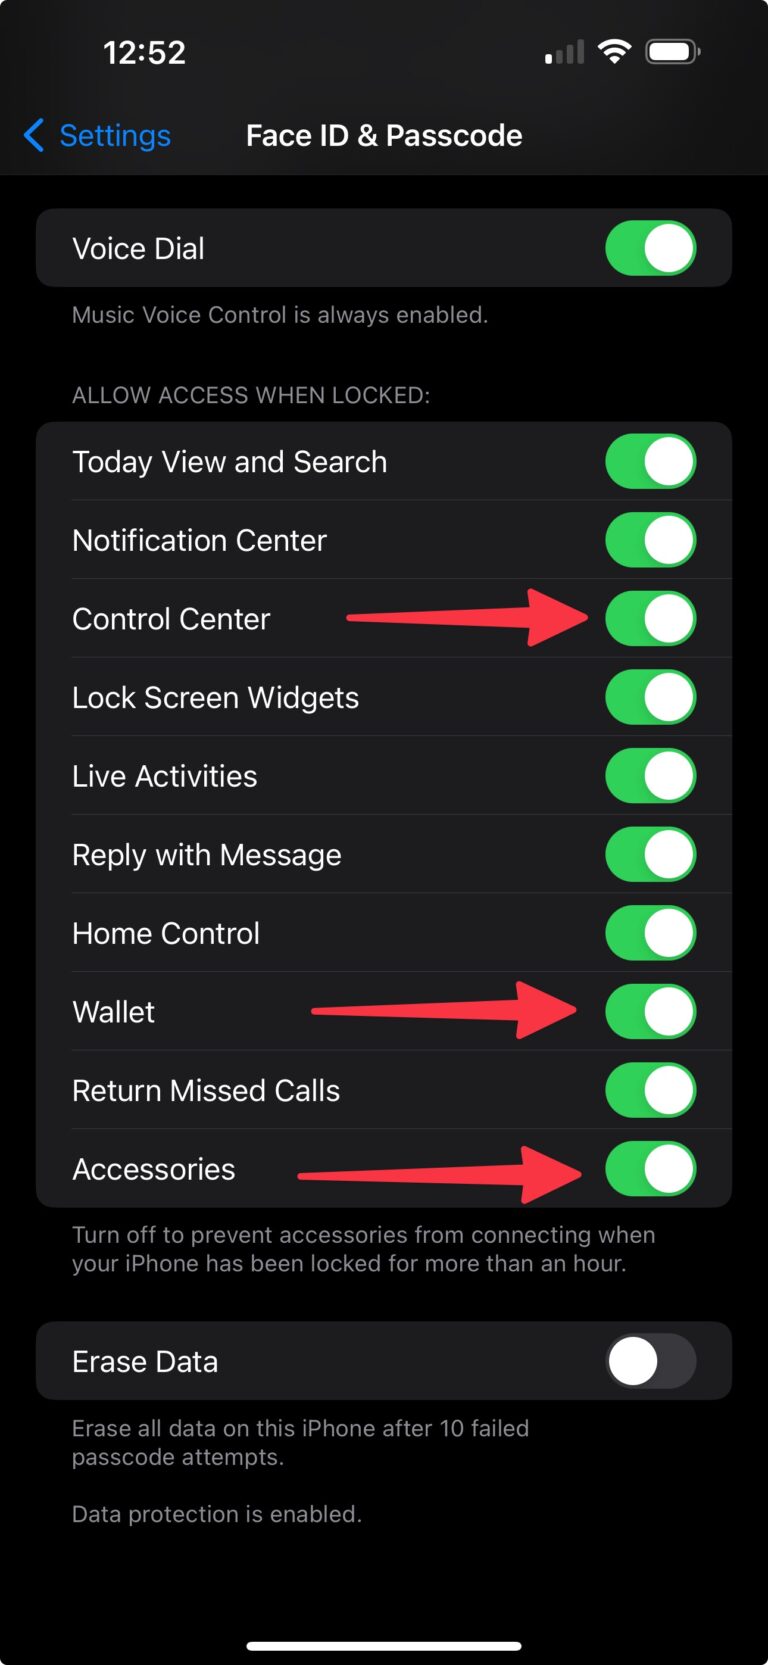 Disable Control Center, Wallet and Accessories